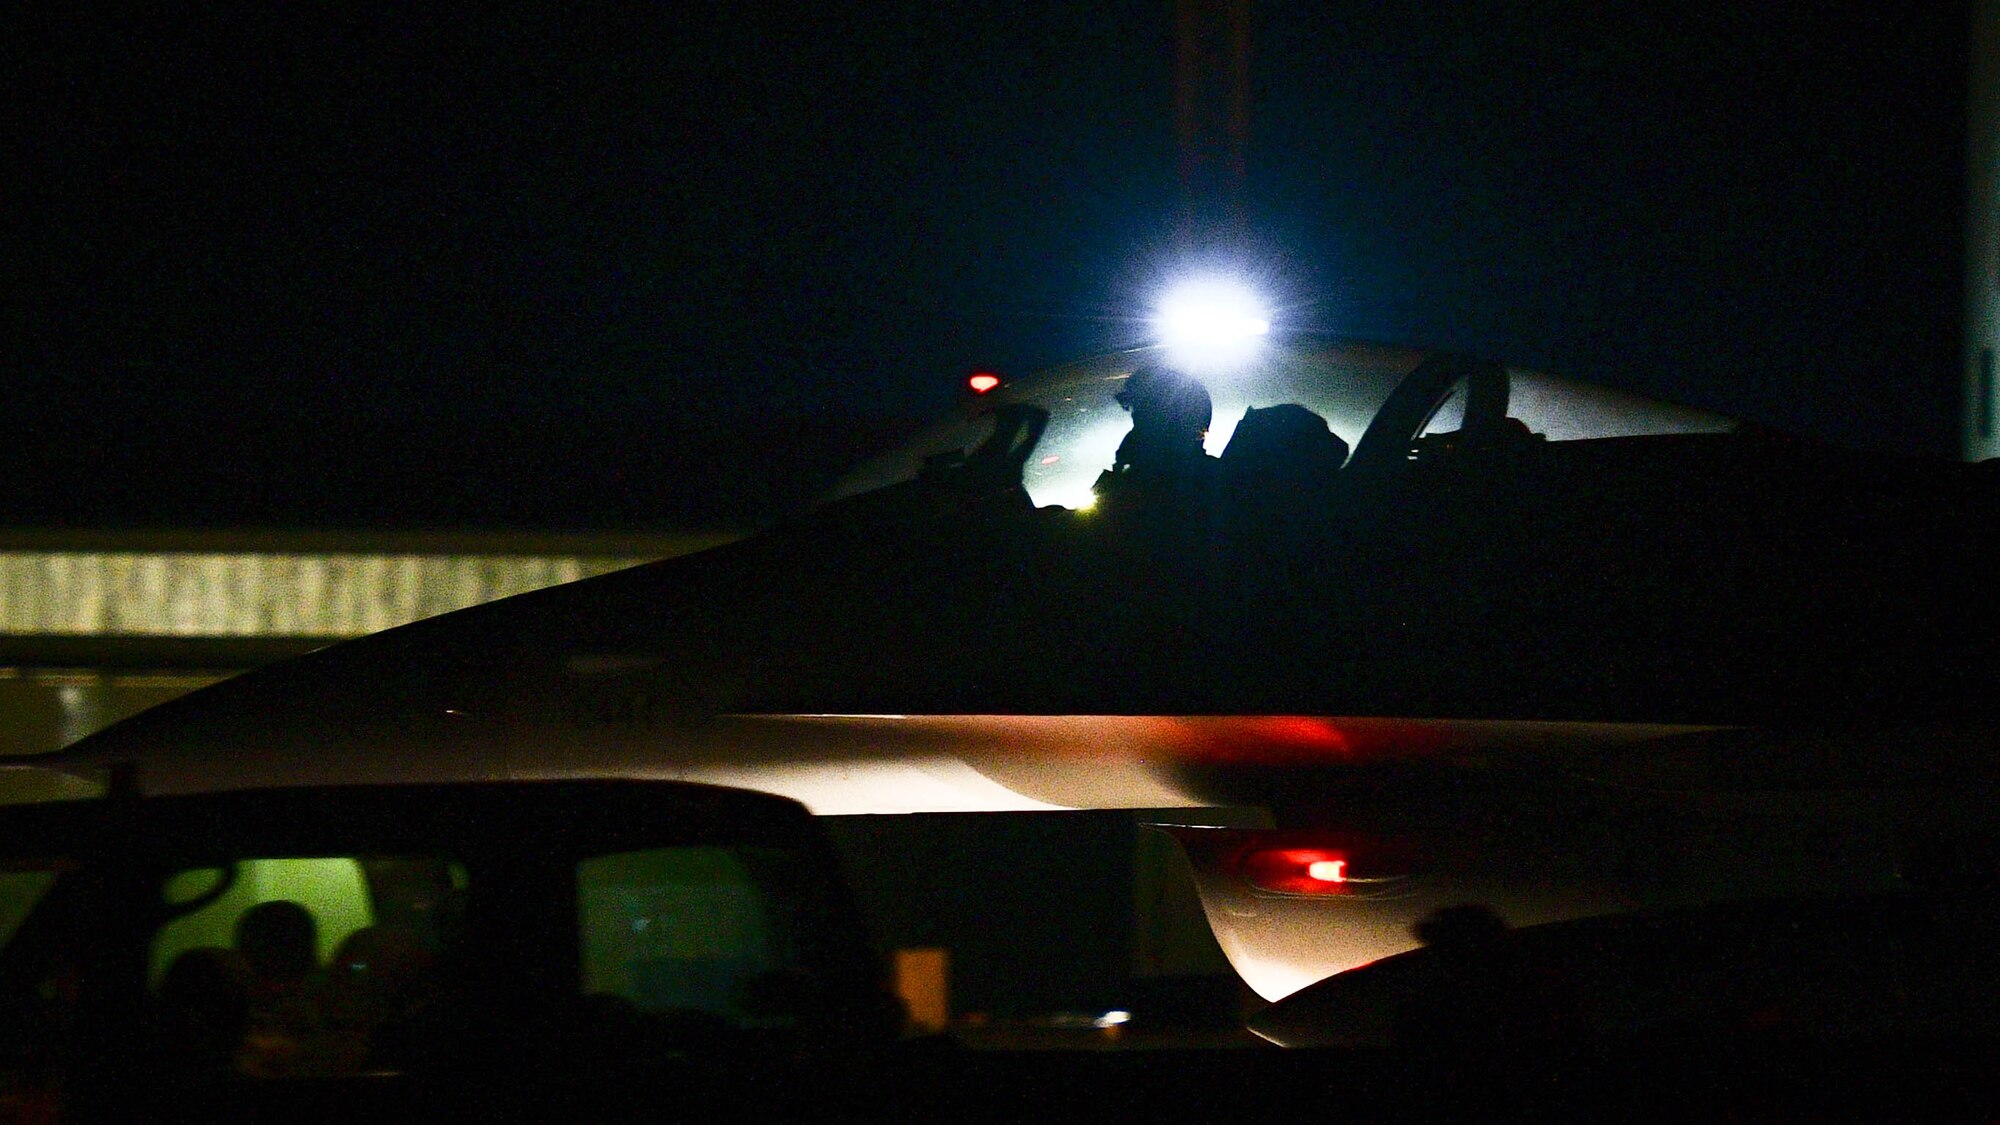 An F-16 Fighting Falcon assigned to the 510th Fighter Squadron taxis on the flightline after simulating an aircraft mishap at Aviano Air Base, Italy, Nov. 4, 2021. The training event provided the 31st Civil Engineer Squadron’s fire department and explosive ordnance disposal flight an opportunity to perform recovery responses on an F-16. (U.S. Air Force photo by Senior Airman Brooke Moeder)